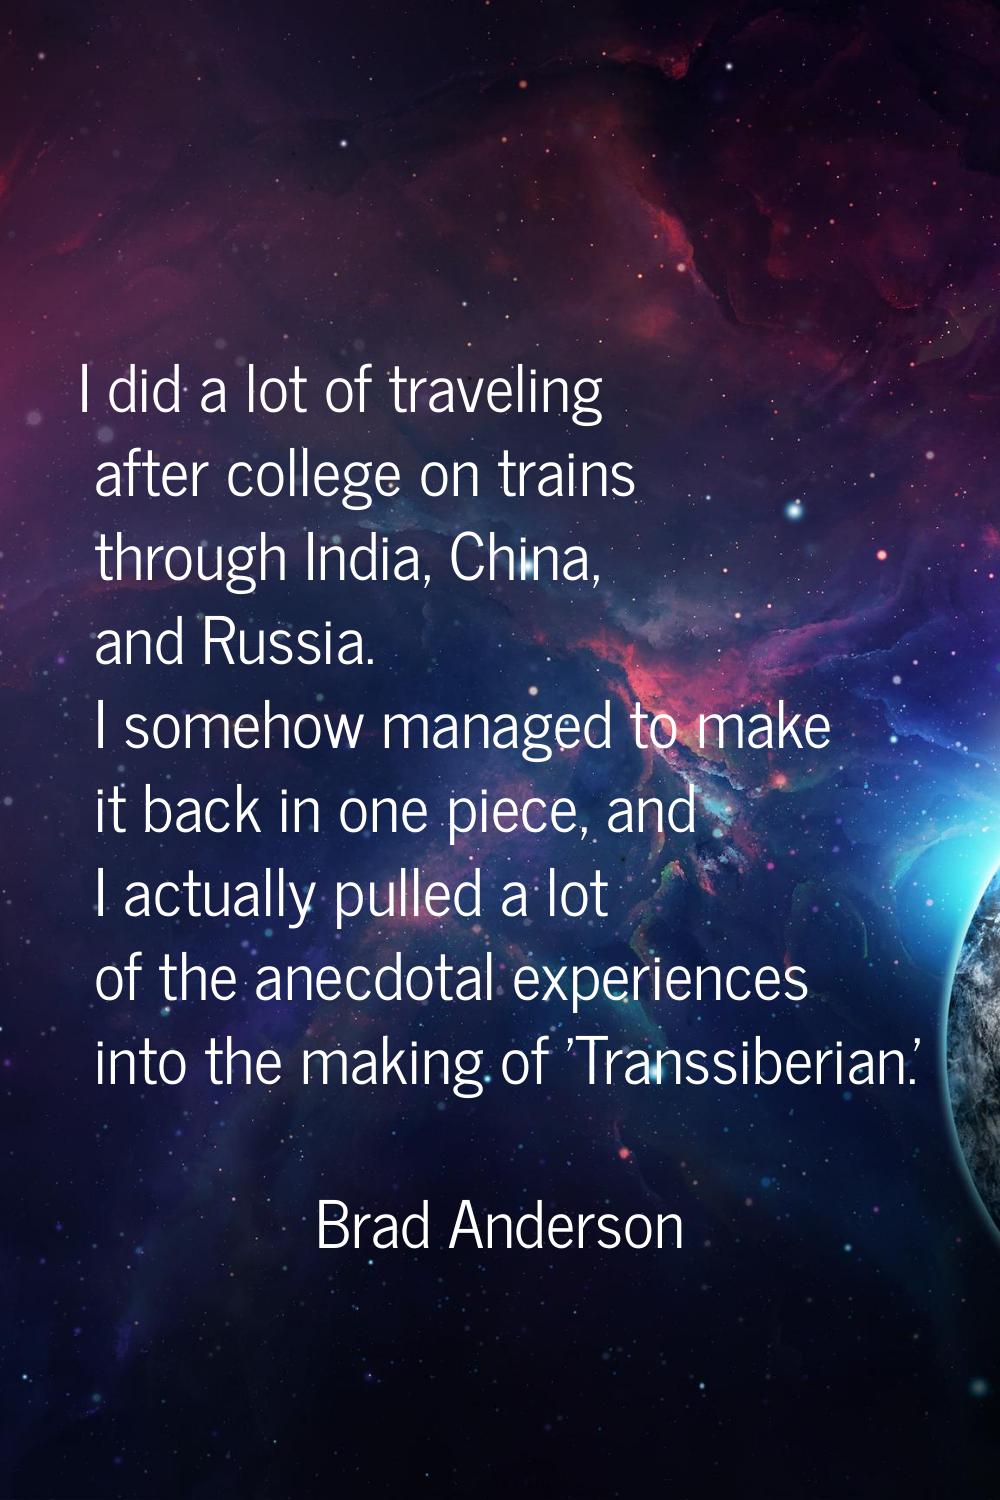 I did a lot of traveling after college on trains through India, China, and Russia. I somehow manage